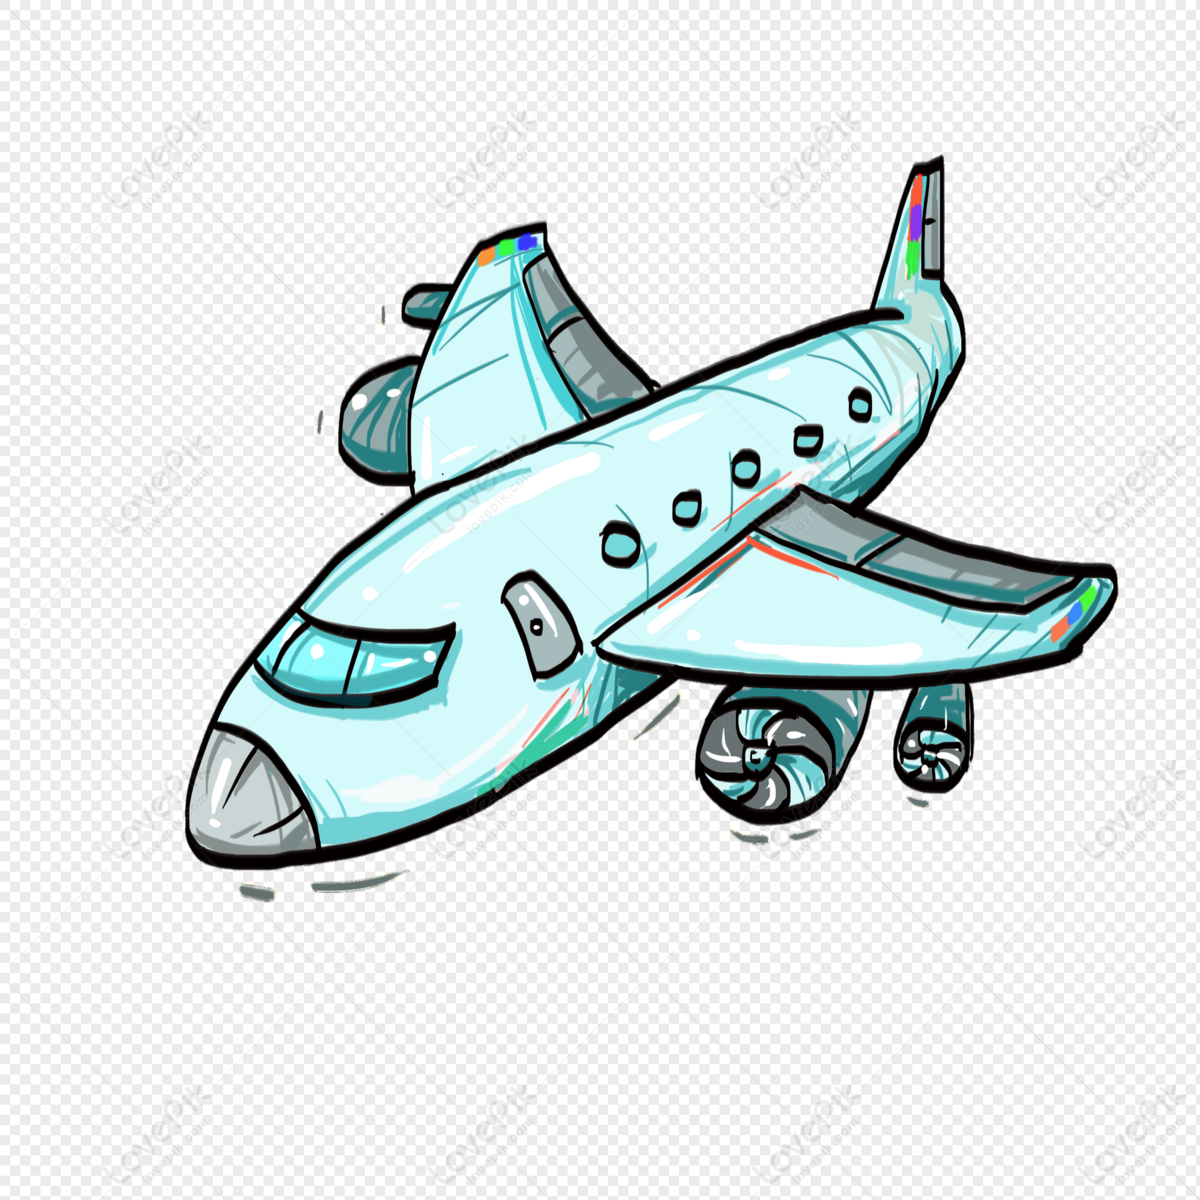 Cartoon Small Airplane Toy Free PNG And Clipart Image For Free Download -  Lovepik | 401231379